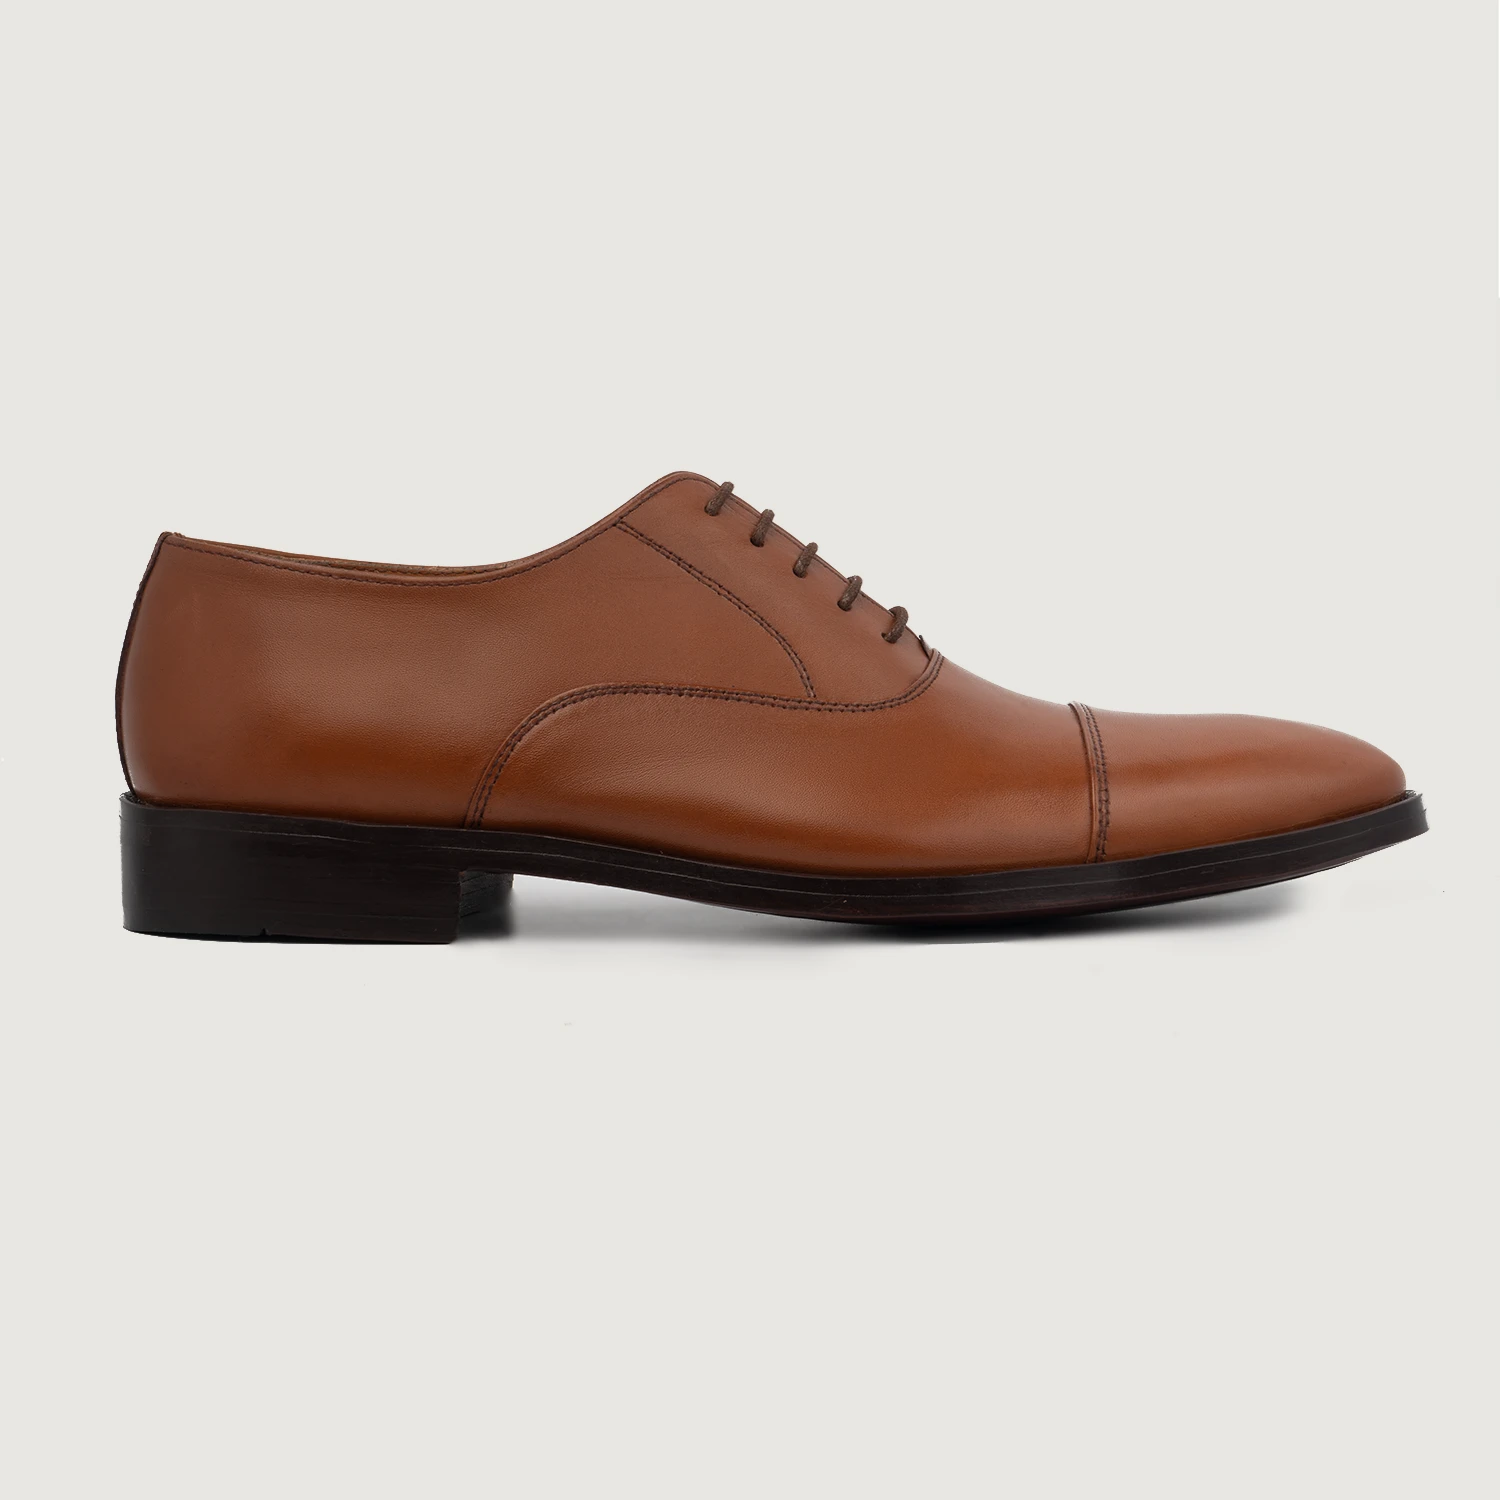 Professor Oxford Tan Leather Shoes